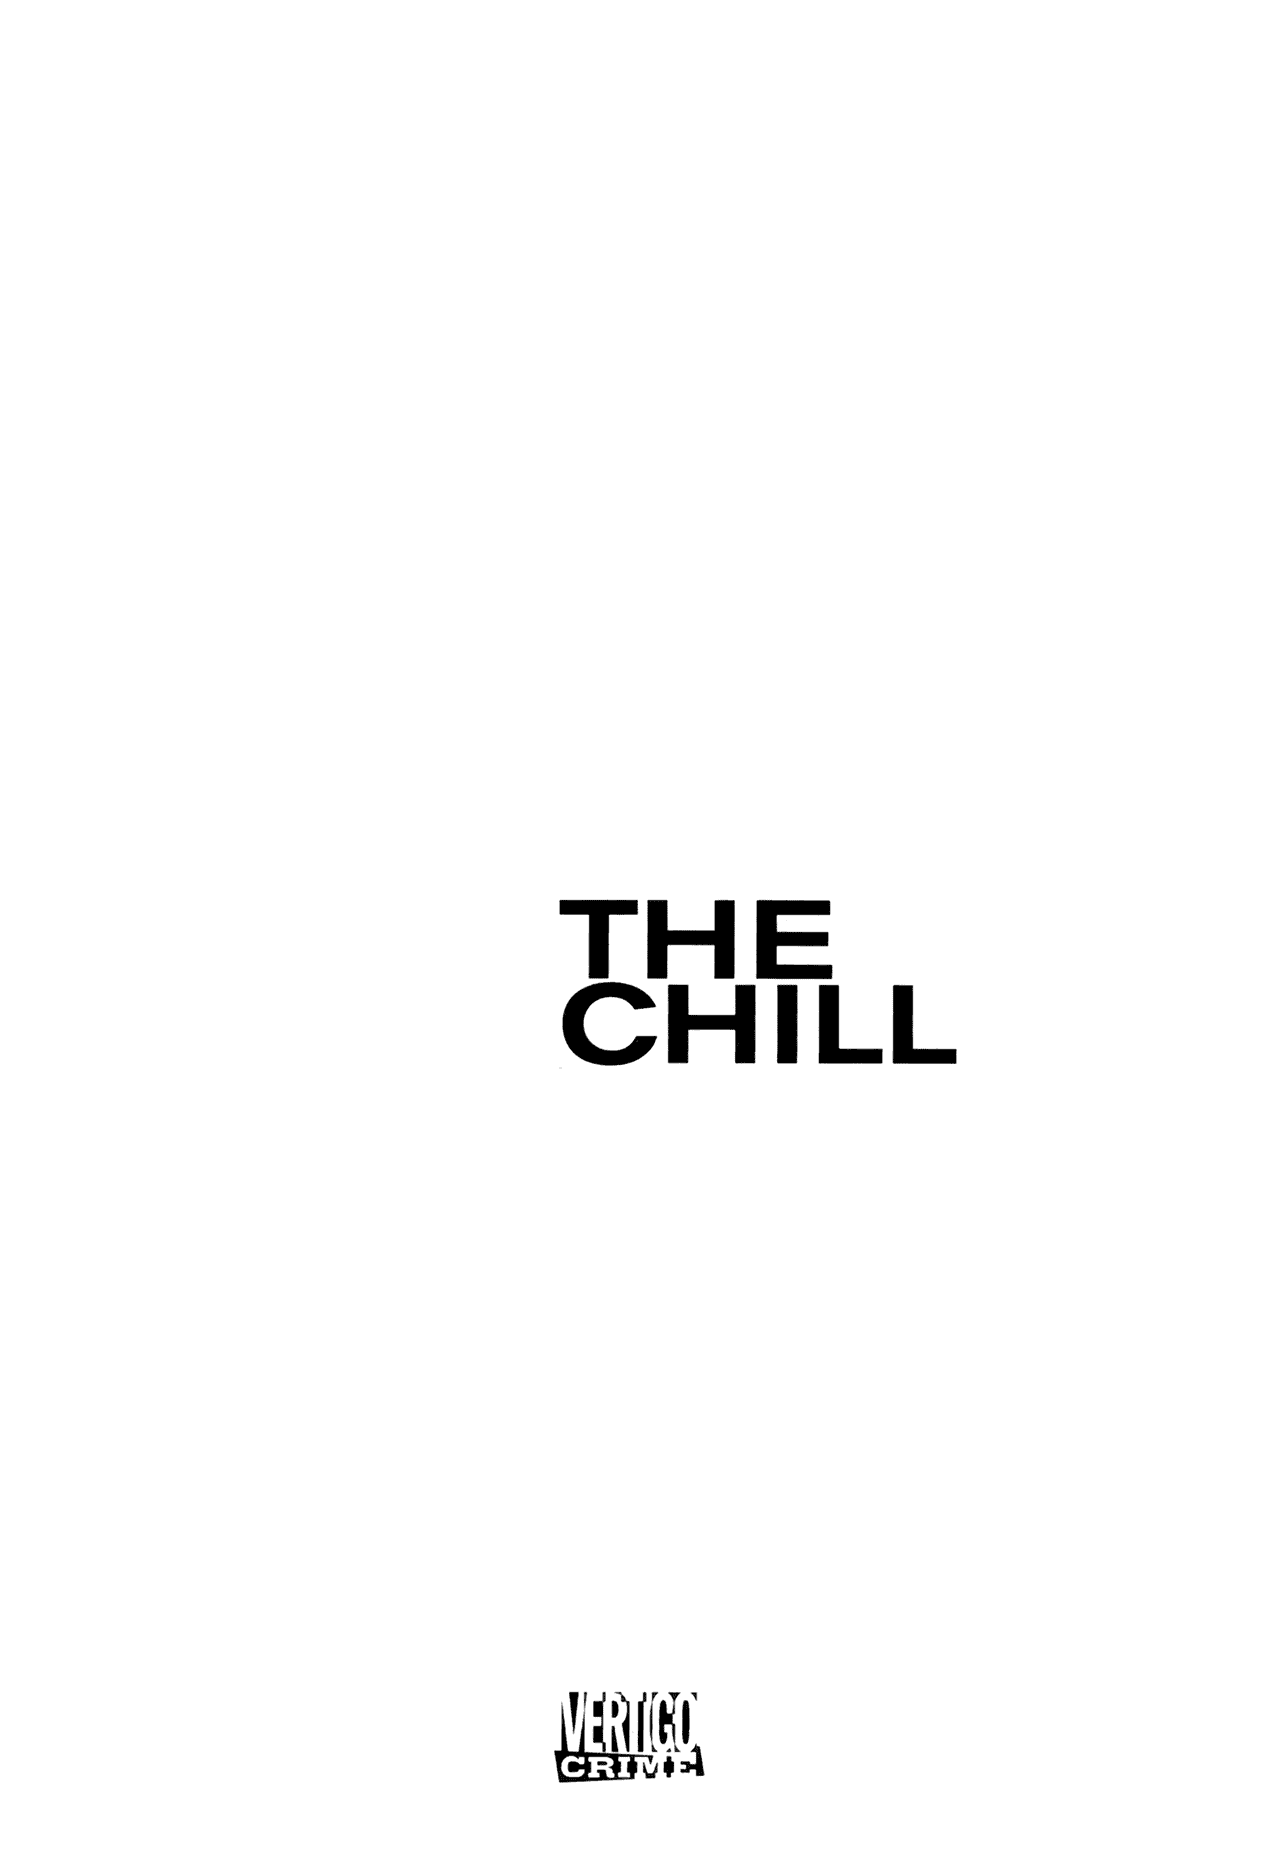 Read online The Chill comic -  Issue # TPB - 4